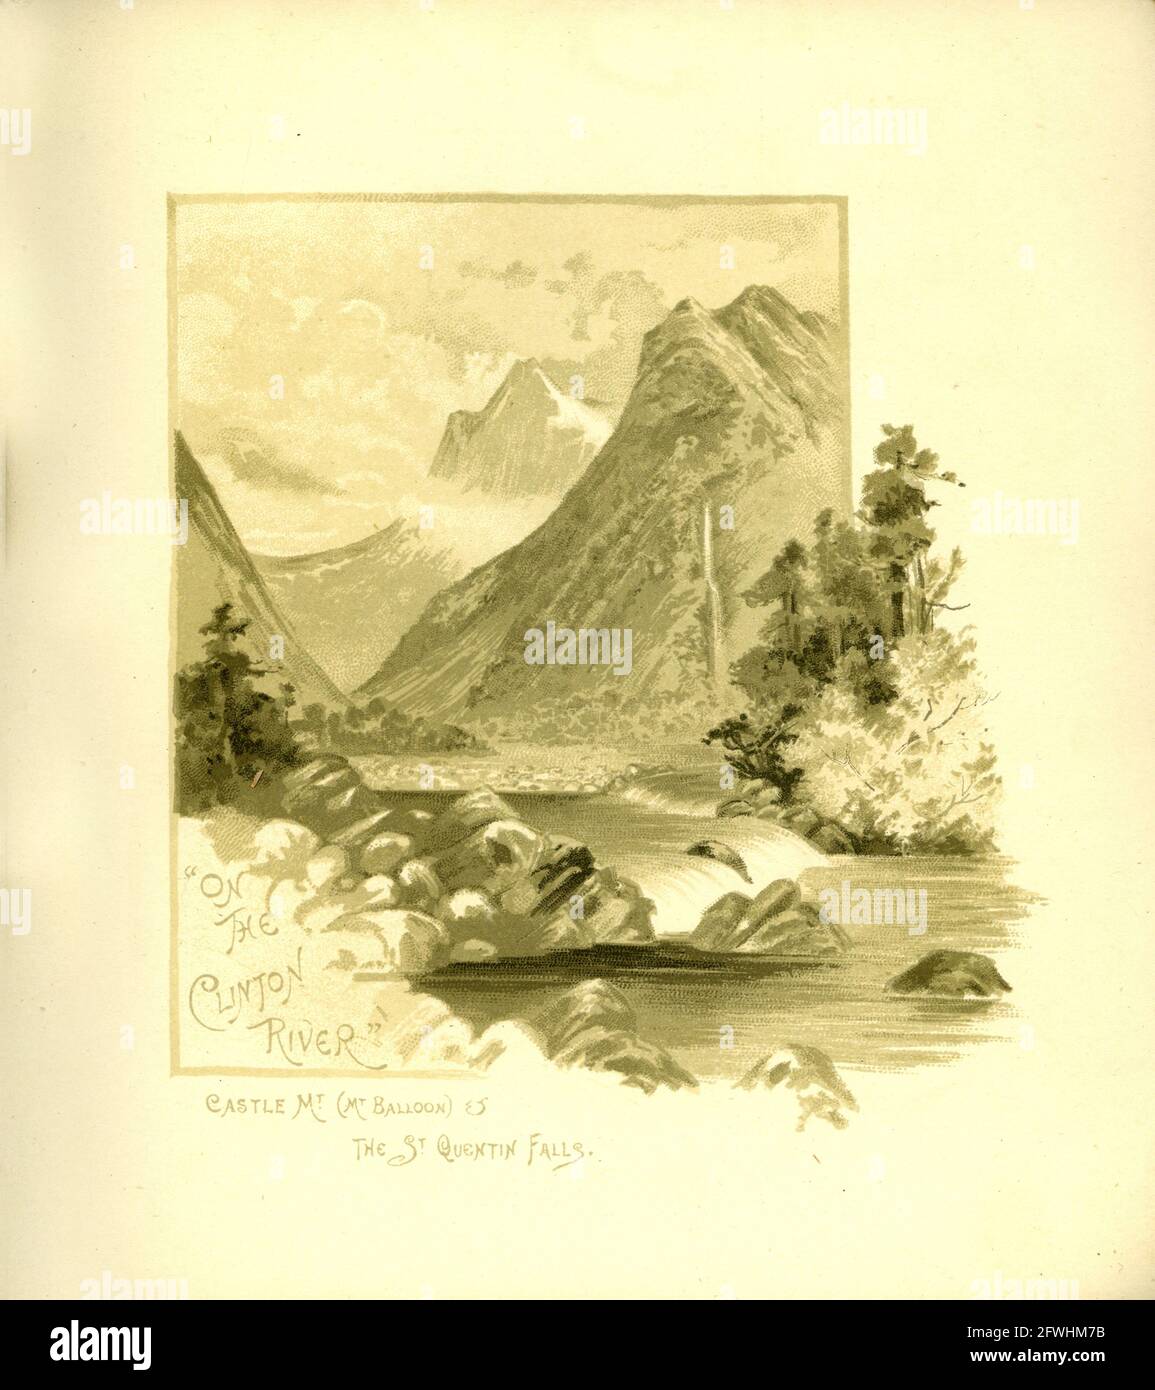 Vintage painting of the St Quentin Falls on the Clinton River with Castle Mount in the background, Fiordland, New Zealand, from a tourist publication in 1894 Stock Photo